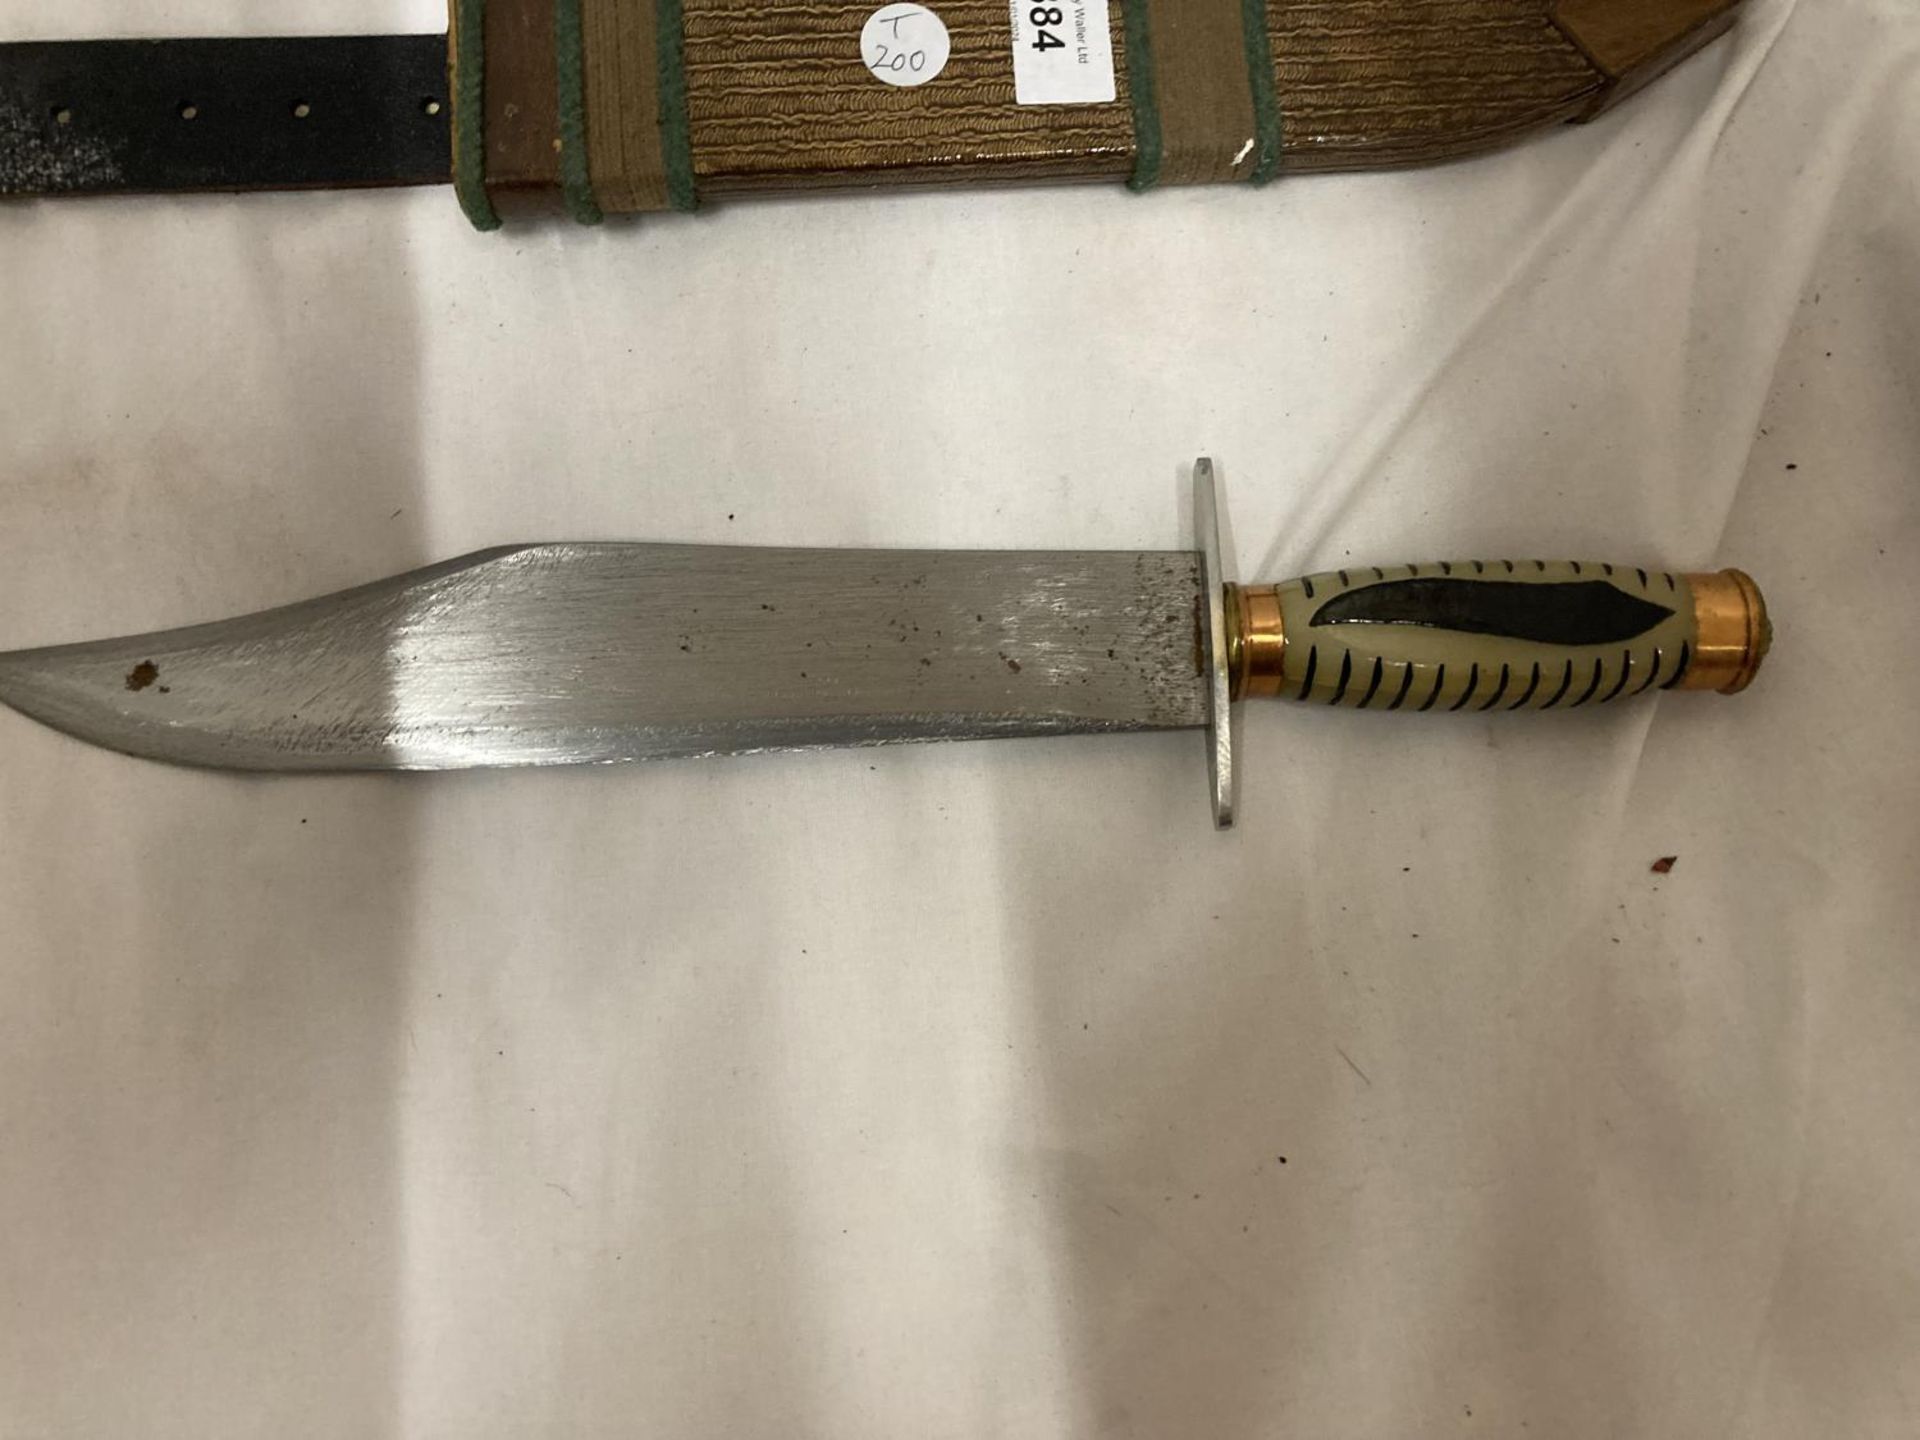 A BOWIE KNIFE AND SCABBARD WITH 26.5CM BLADE - Image 3 of 4